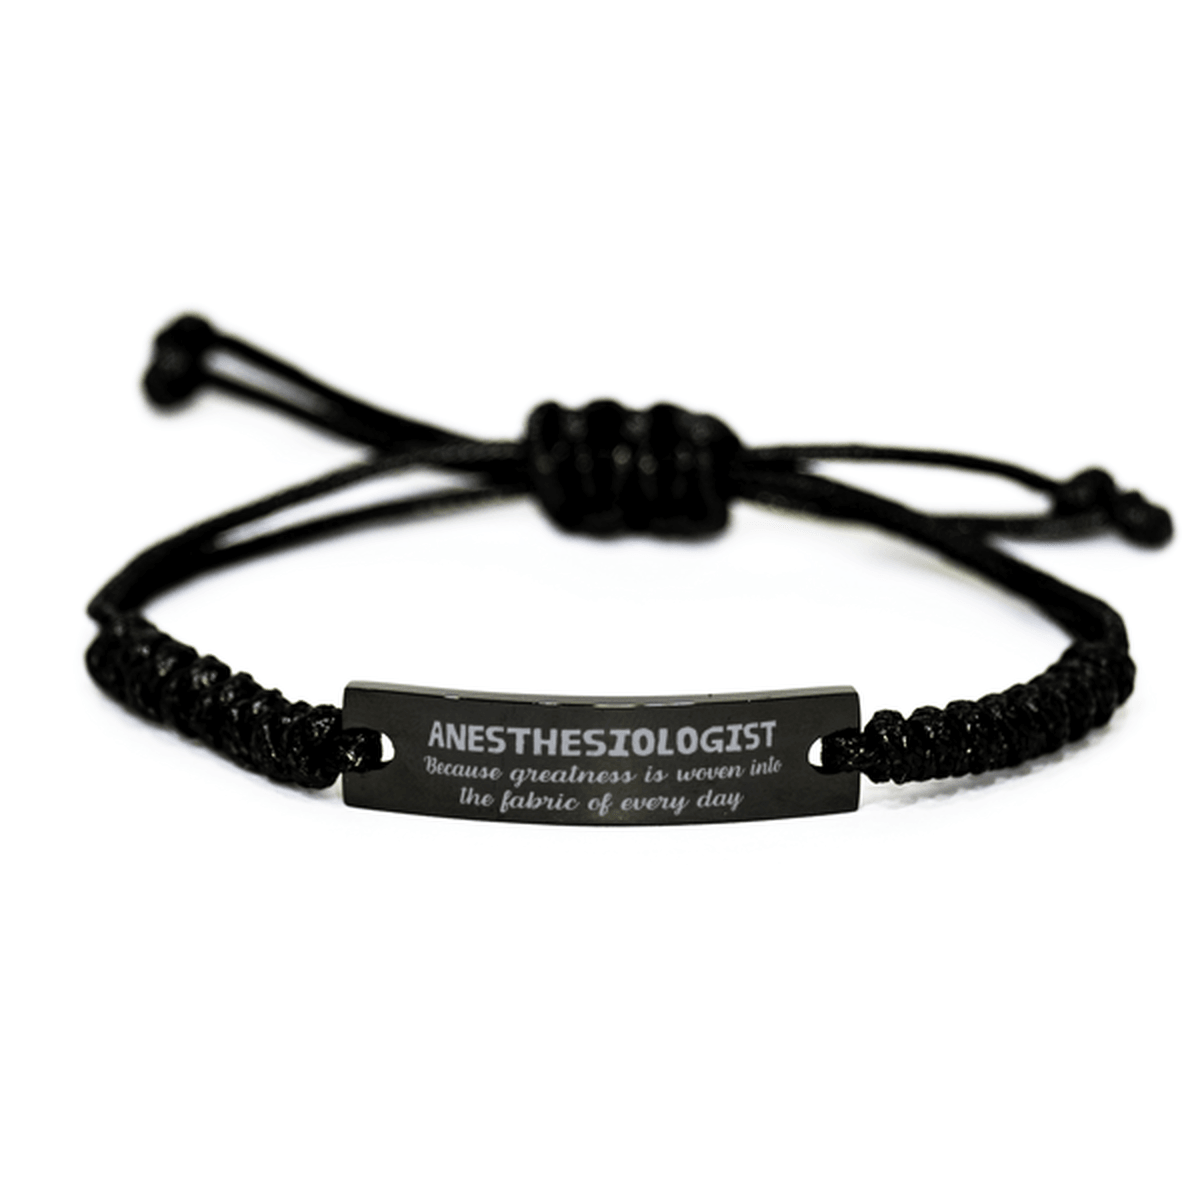 Sarcastic Anesthesiologist Black Rope Bracelet Gifts, Christmas Holiday Gifts for Anesthesiologist Birthday, Anesthesiologist: Because greatness is woven into the fabric of every day, Coworkers, Friends - Mallard Moon Gift Shop